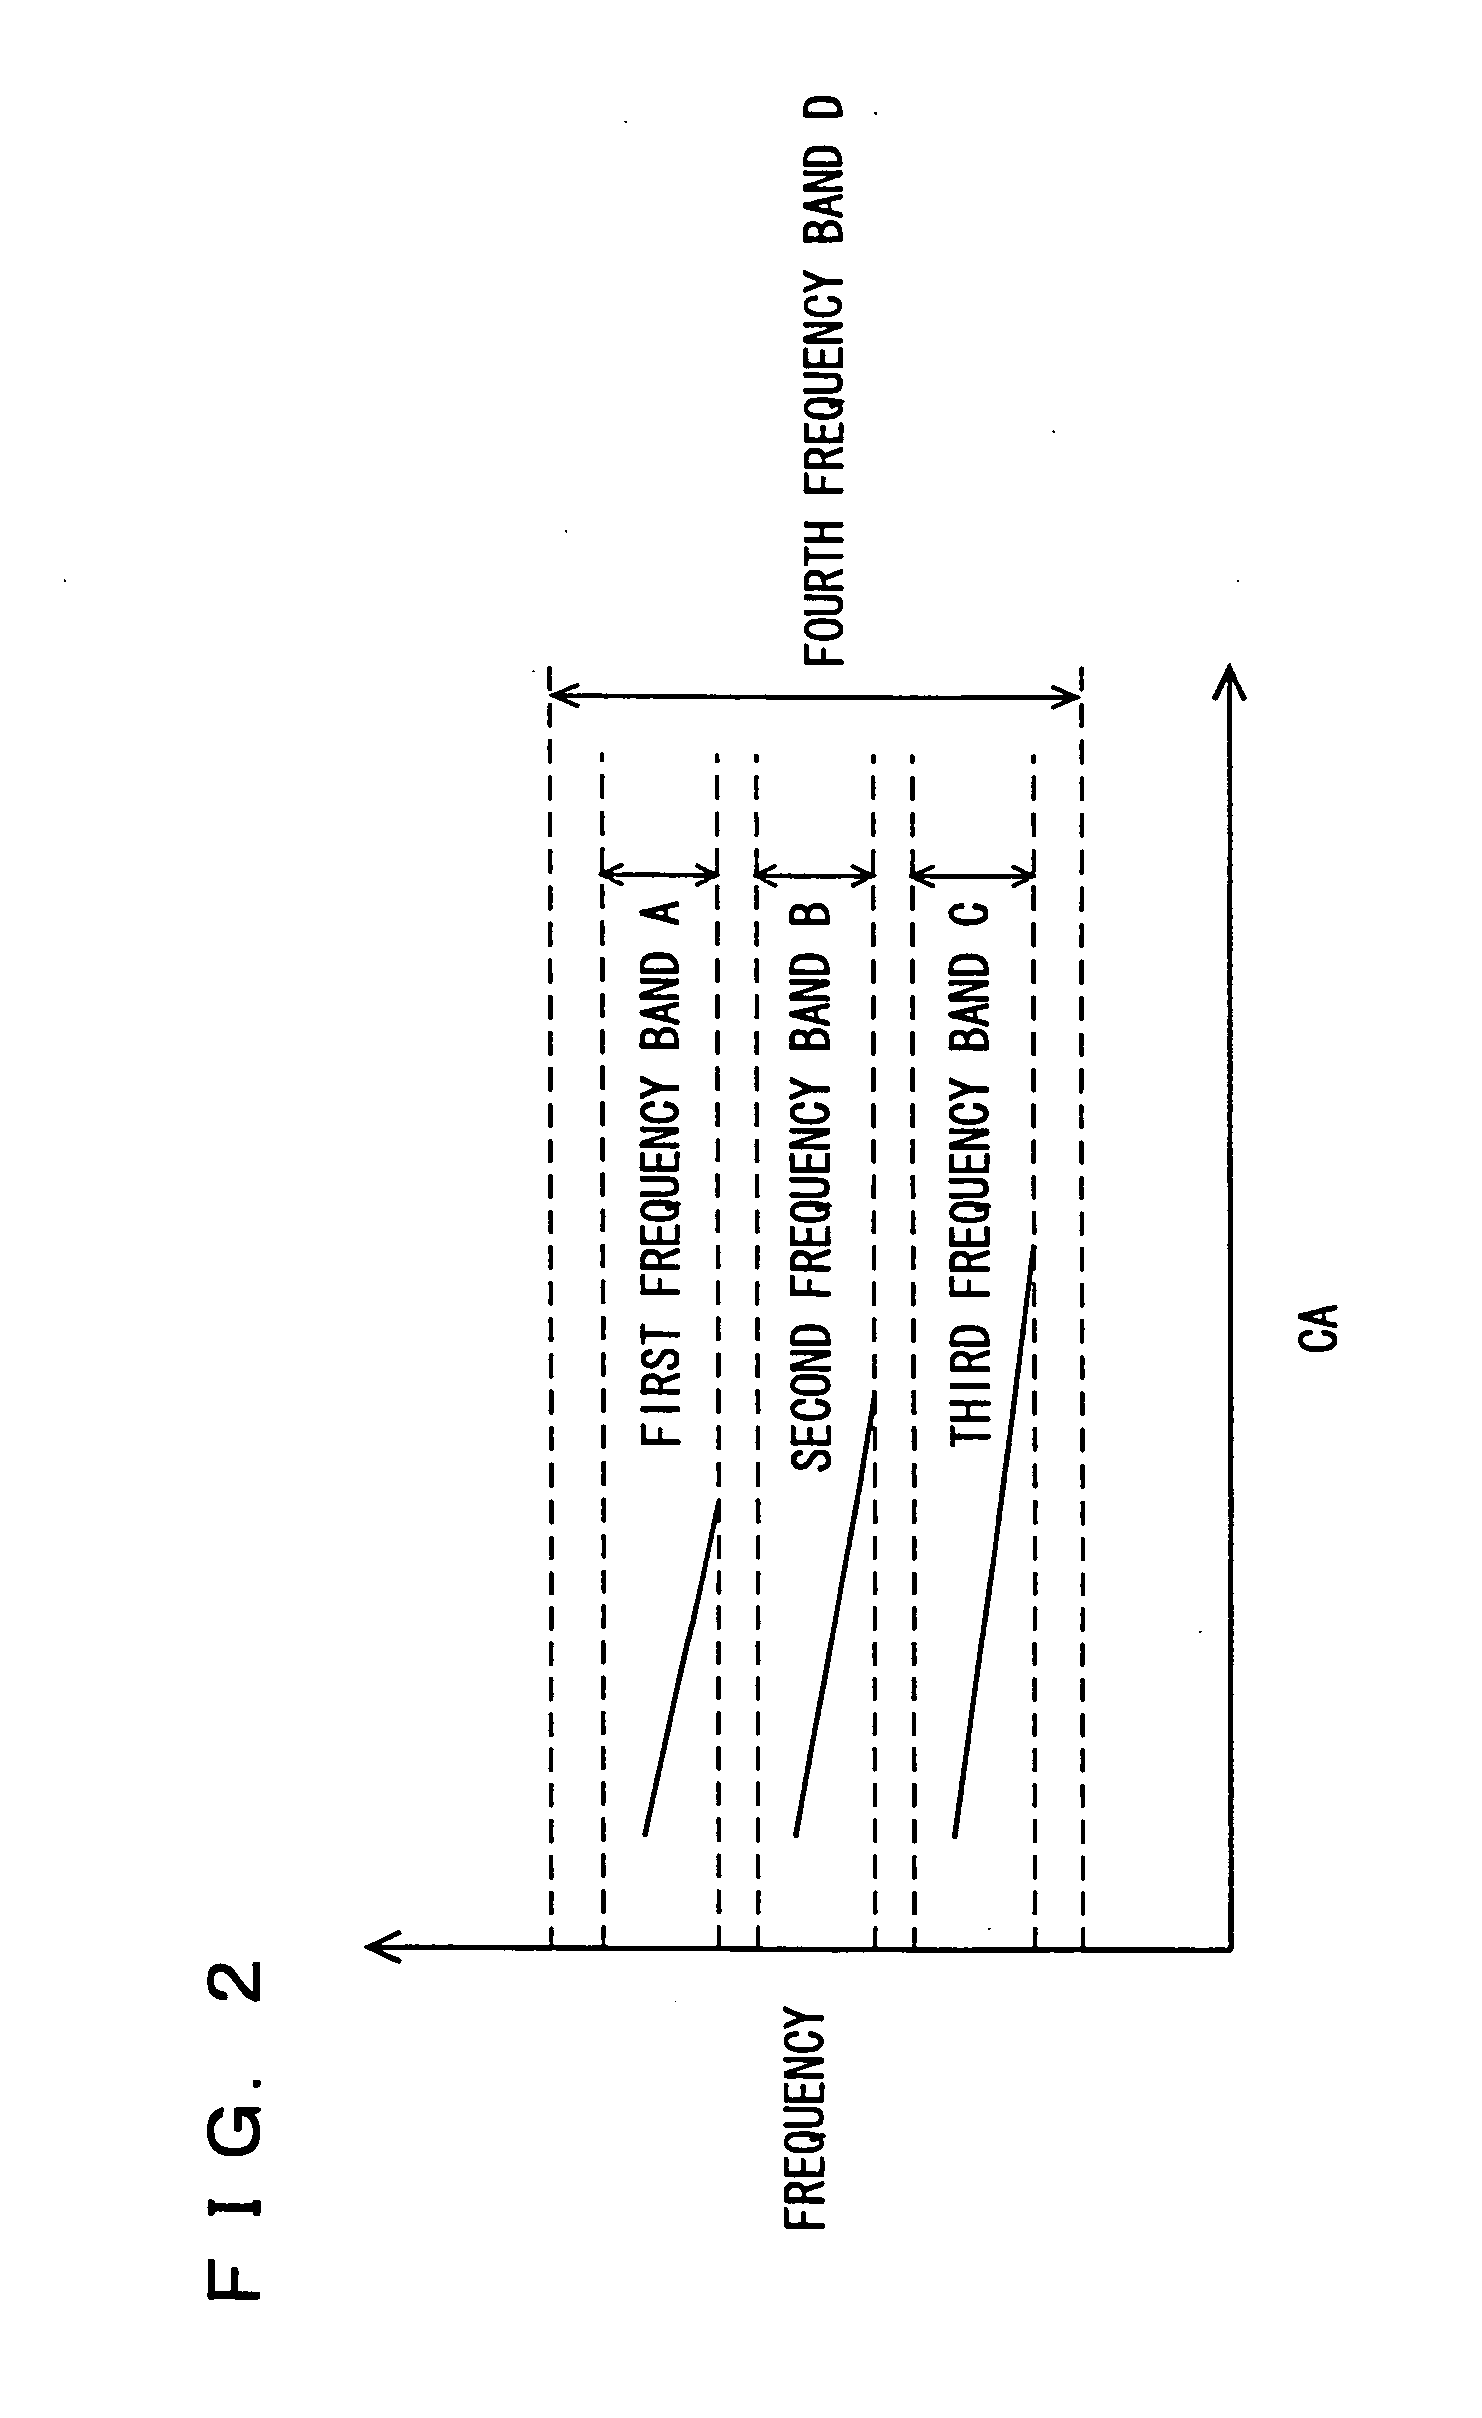 Knocking determination device for internal combustion engine